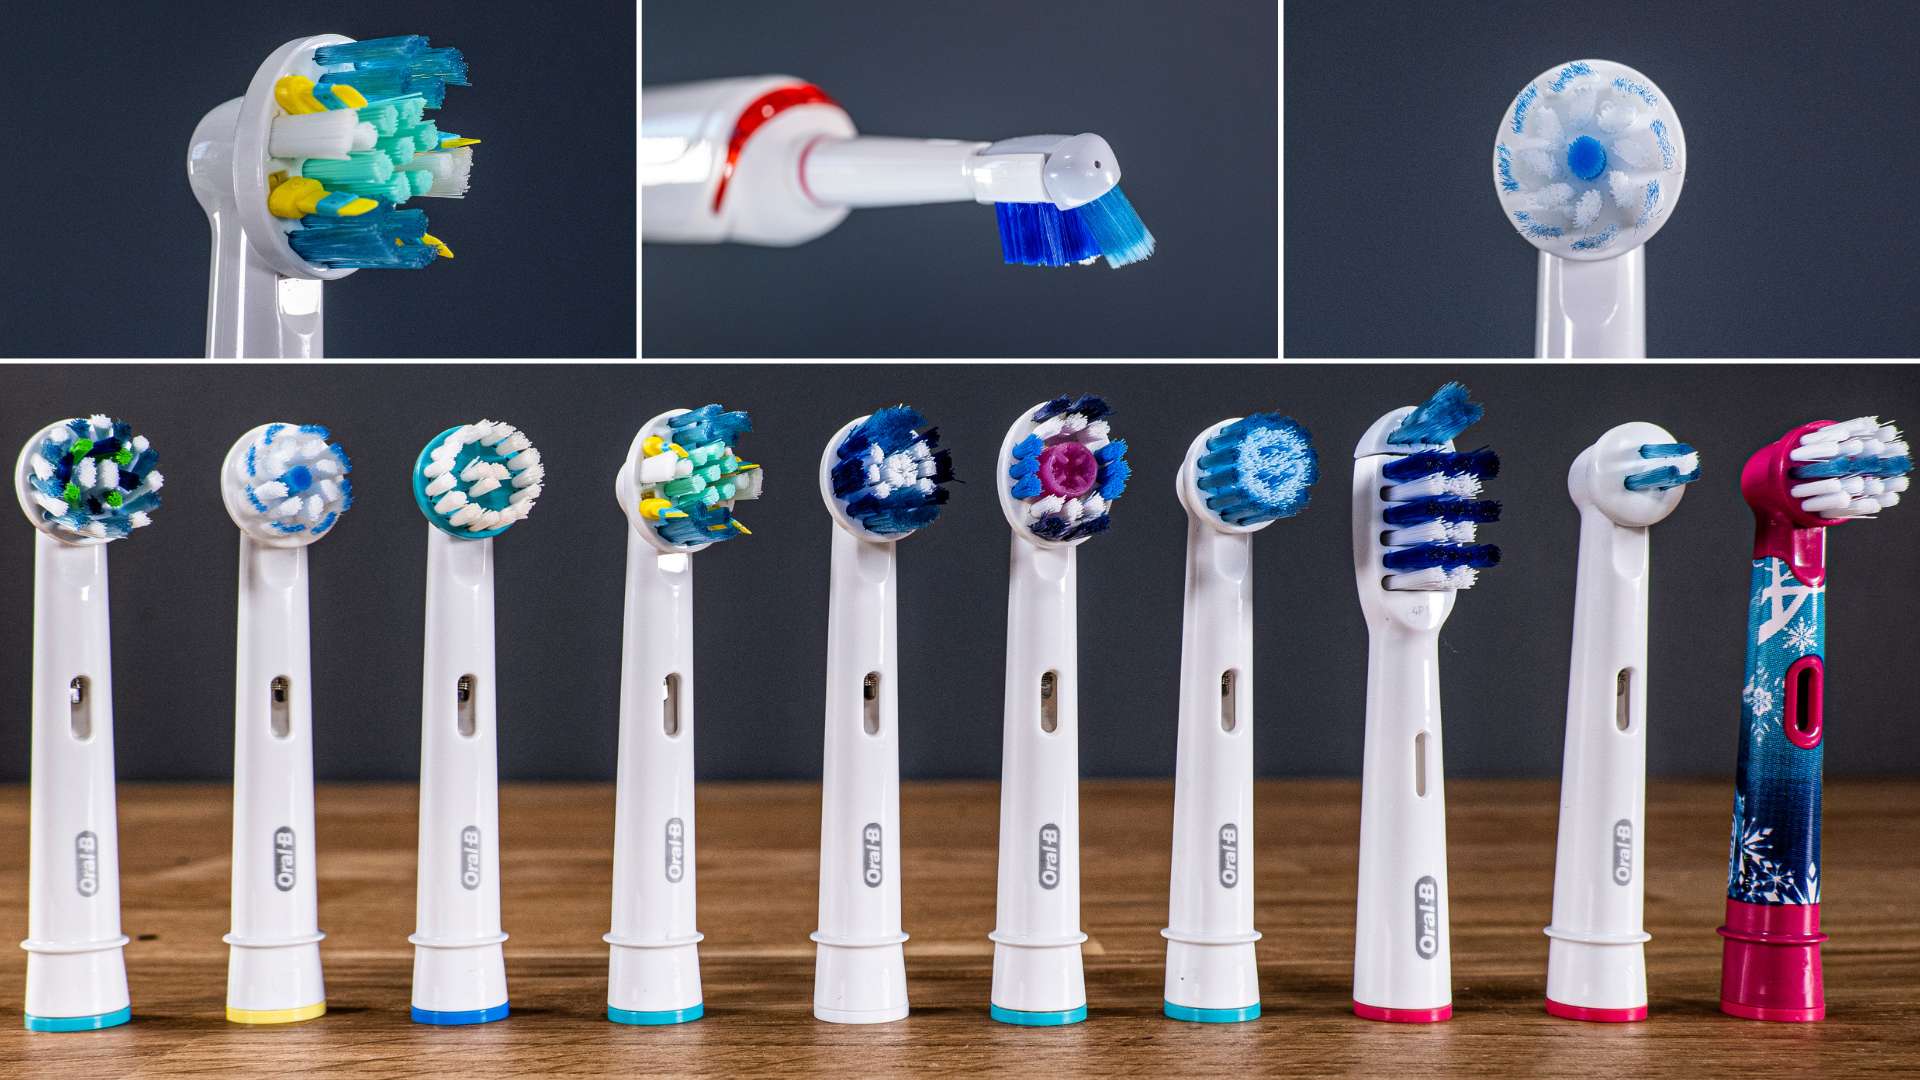 Electric Toothbrushes  Oral-B iO Gentle Care Replacement Electric Brush  Head - 1pk